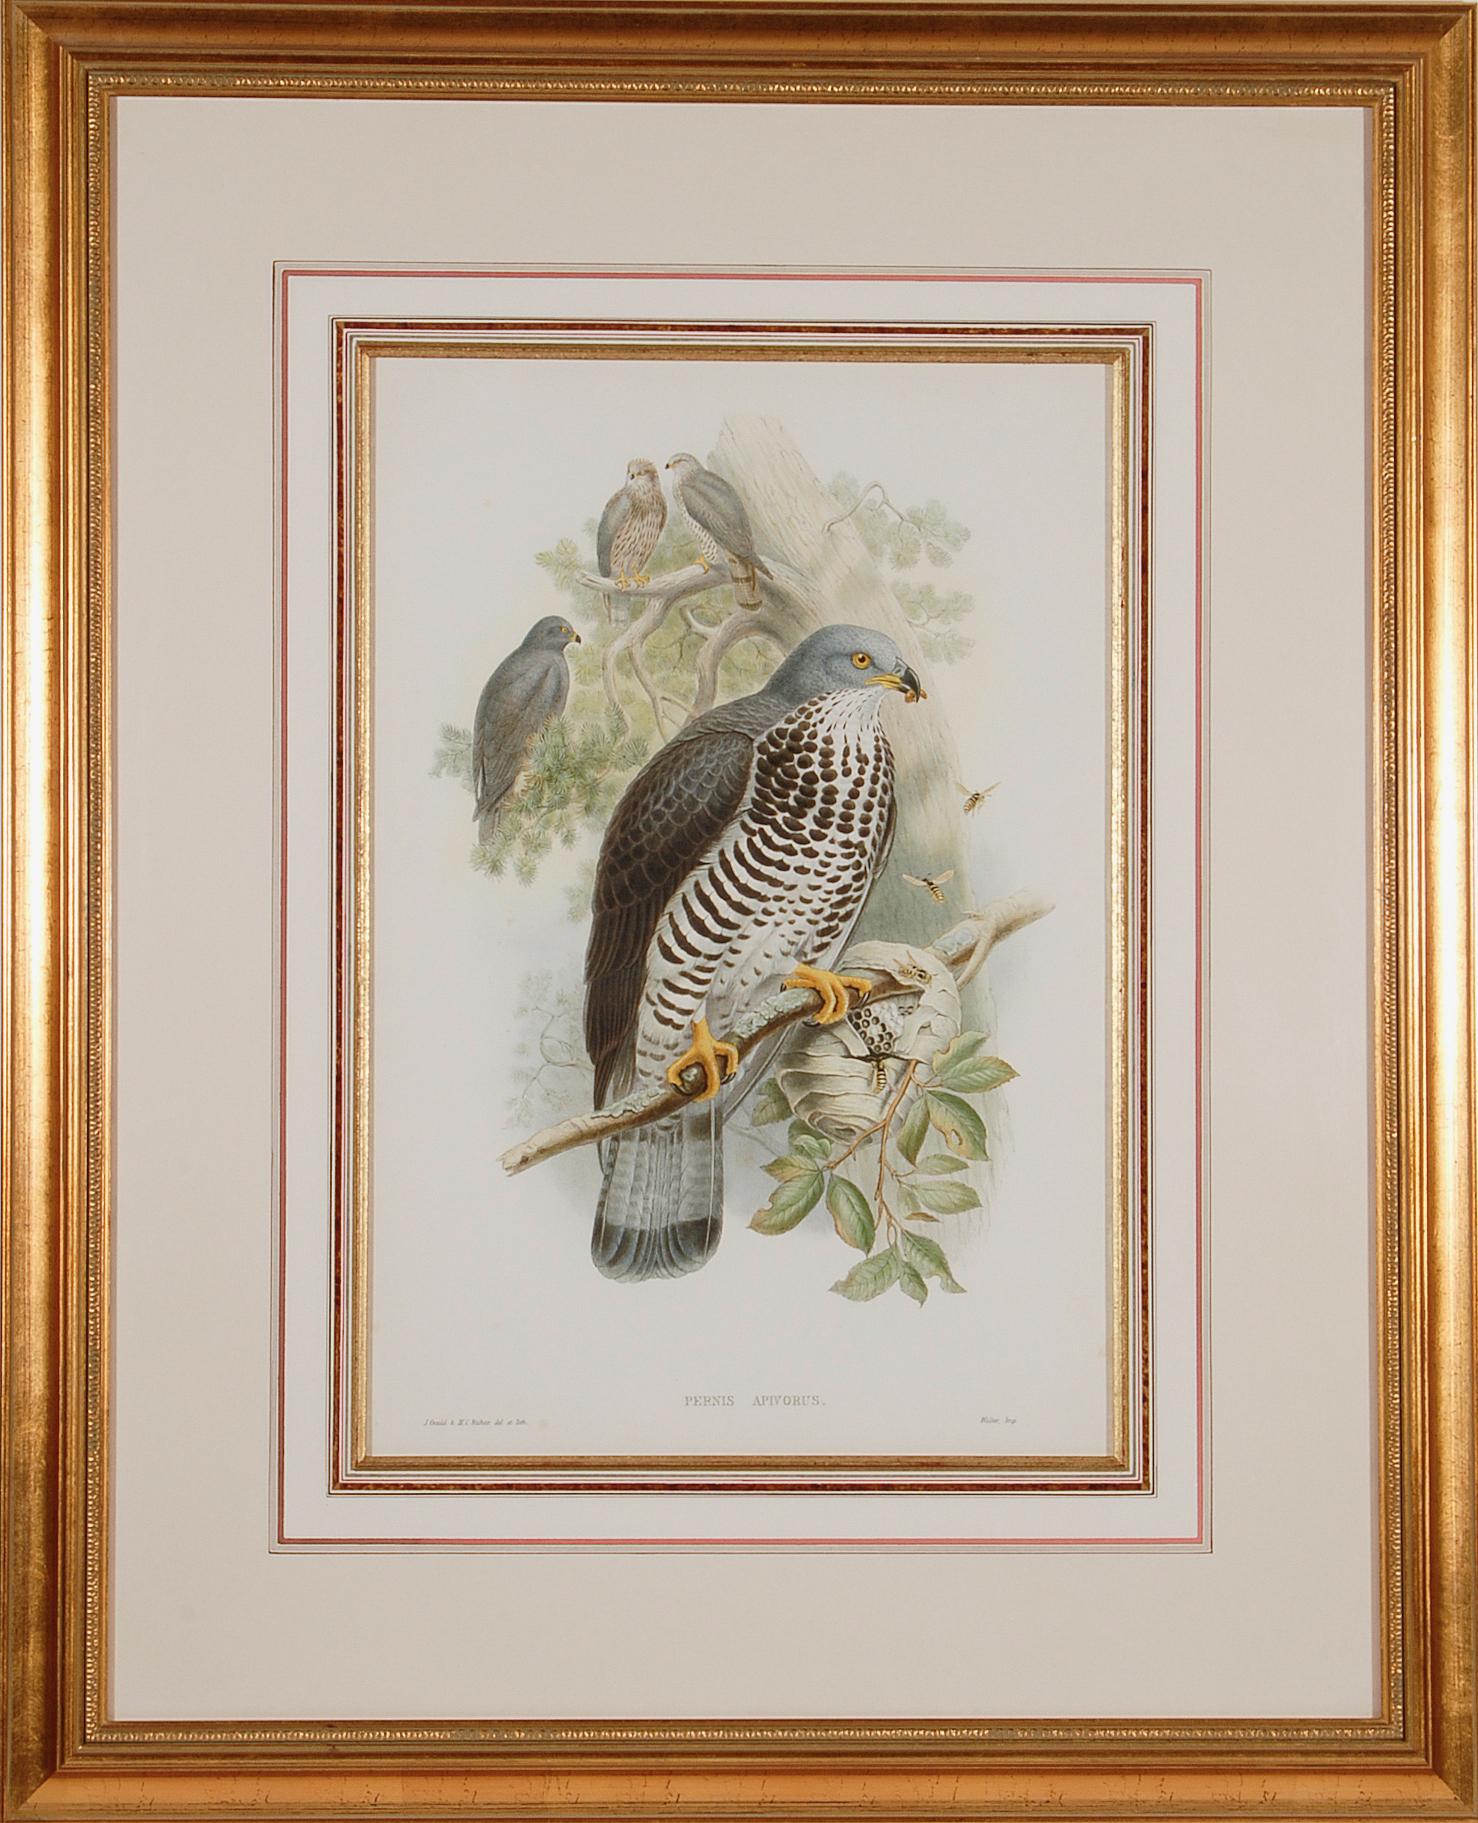 John Gould and Henry Constantine Richter Landscape Print - Honey Buzzard Bird: A Framed Original 19th C. Hand-colored Lithograph by Gould